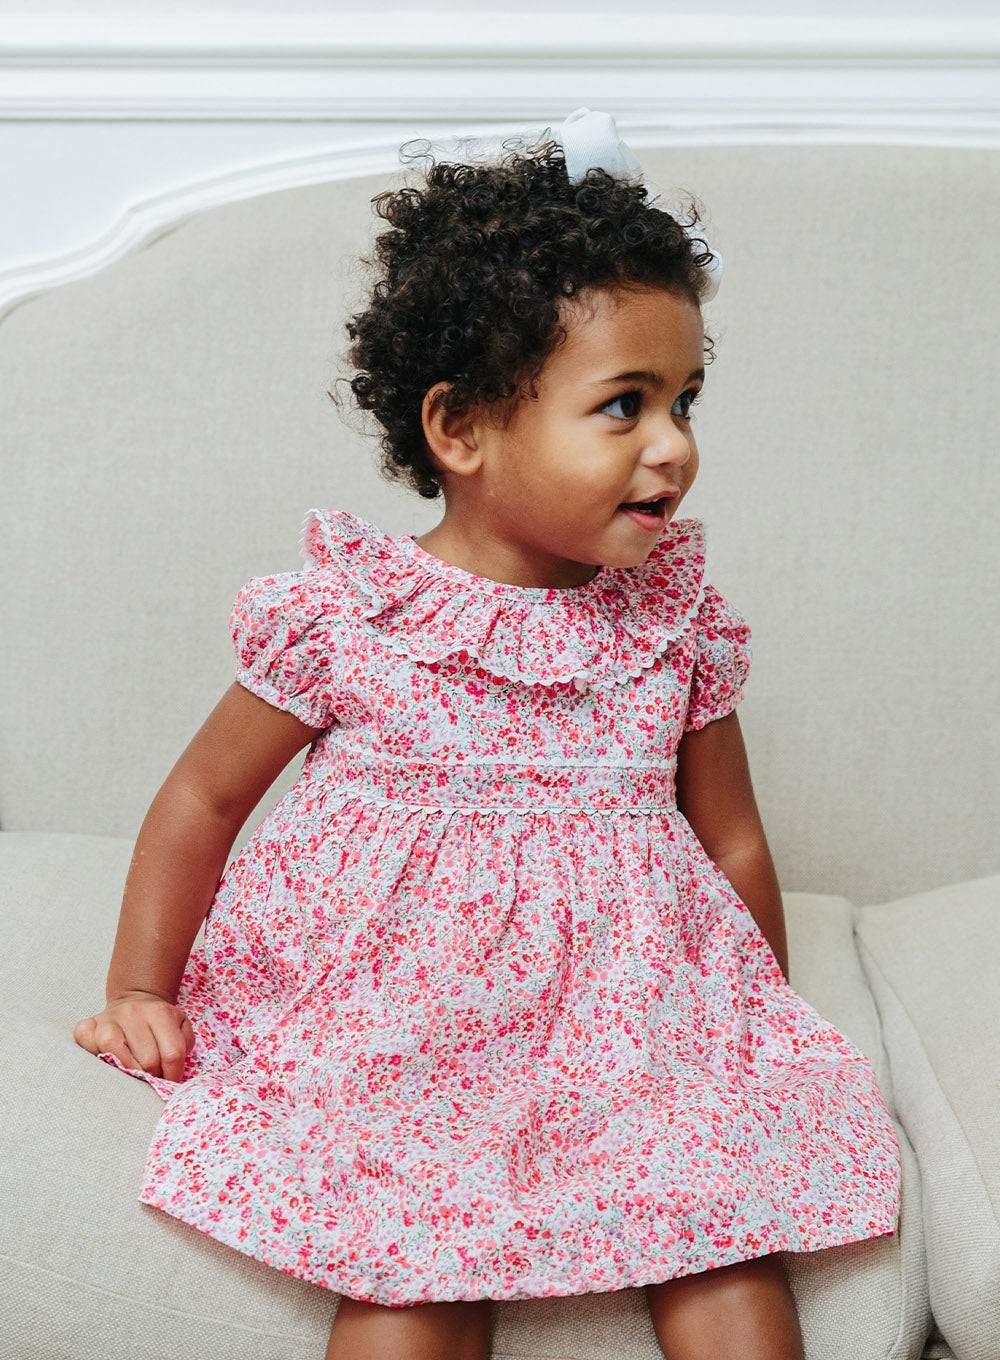 Lily Rose Dress Little Dress in Phoebe